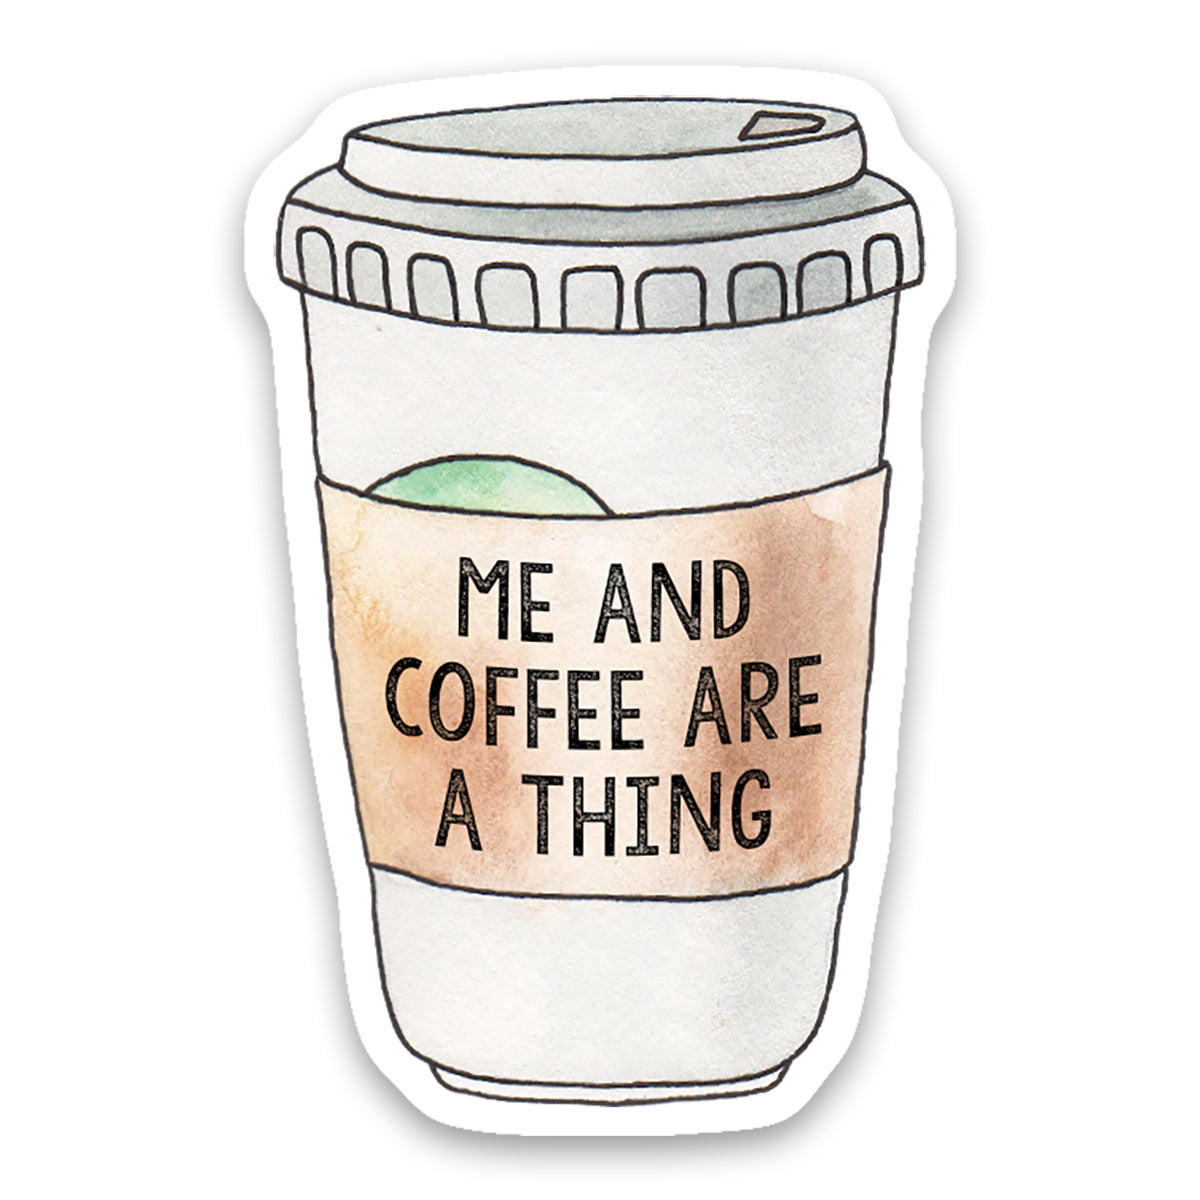 Me And Coffee Are A Thing Sticker